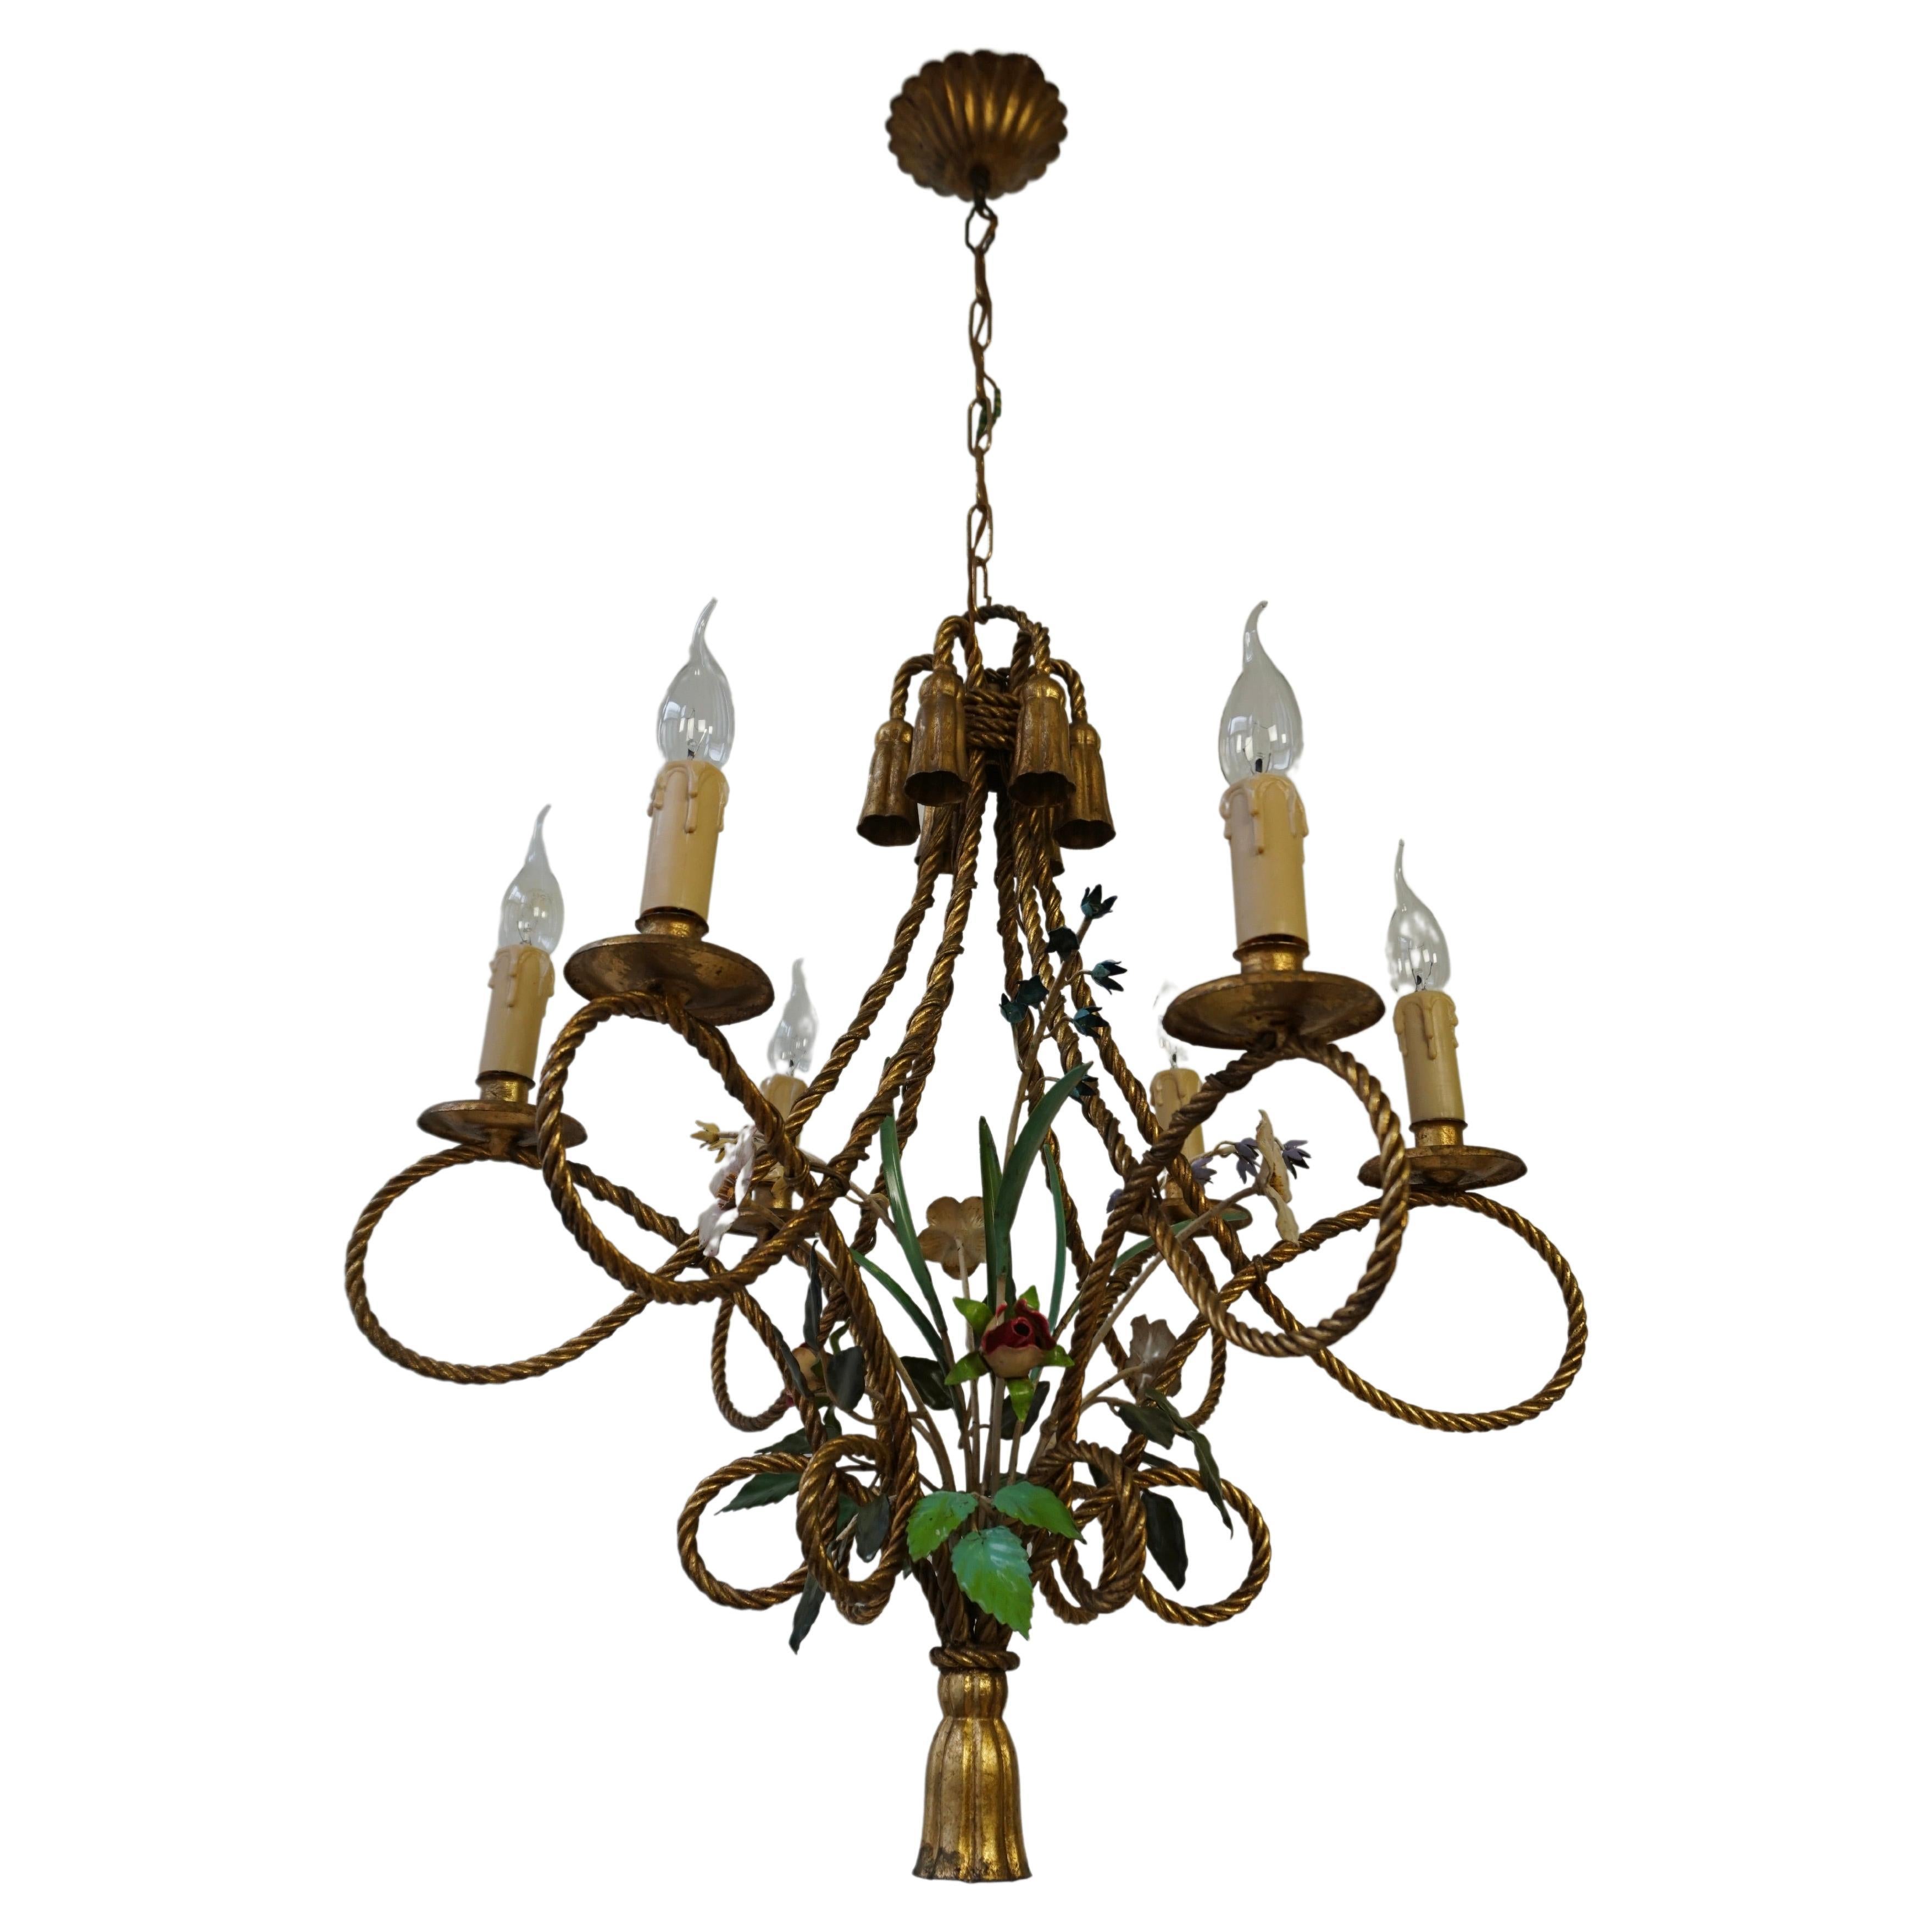 Italian gold-plated metal flower chandelier/tole hanging lamp/tole chandelier.

Unusual dynamic design, consisting of six identical gold-plated metal 'ropes' in a double loop, which come together in a large tassel. The gold-plated metal has acquired